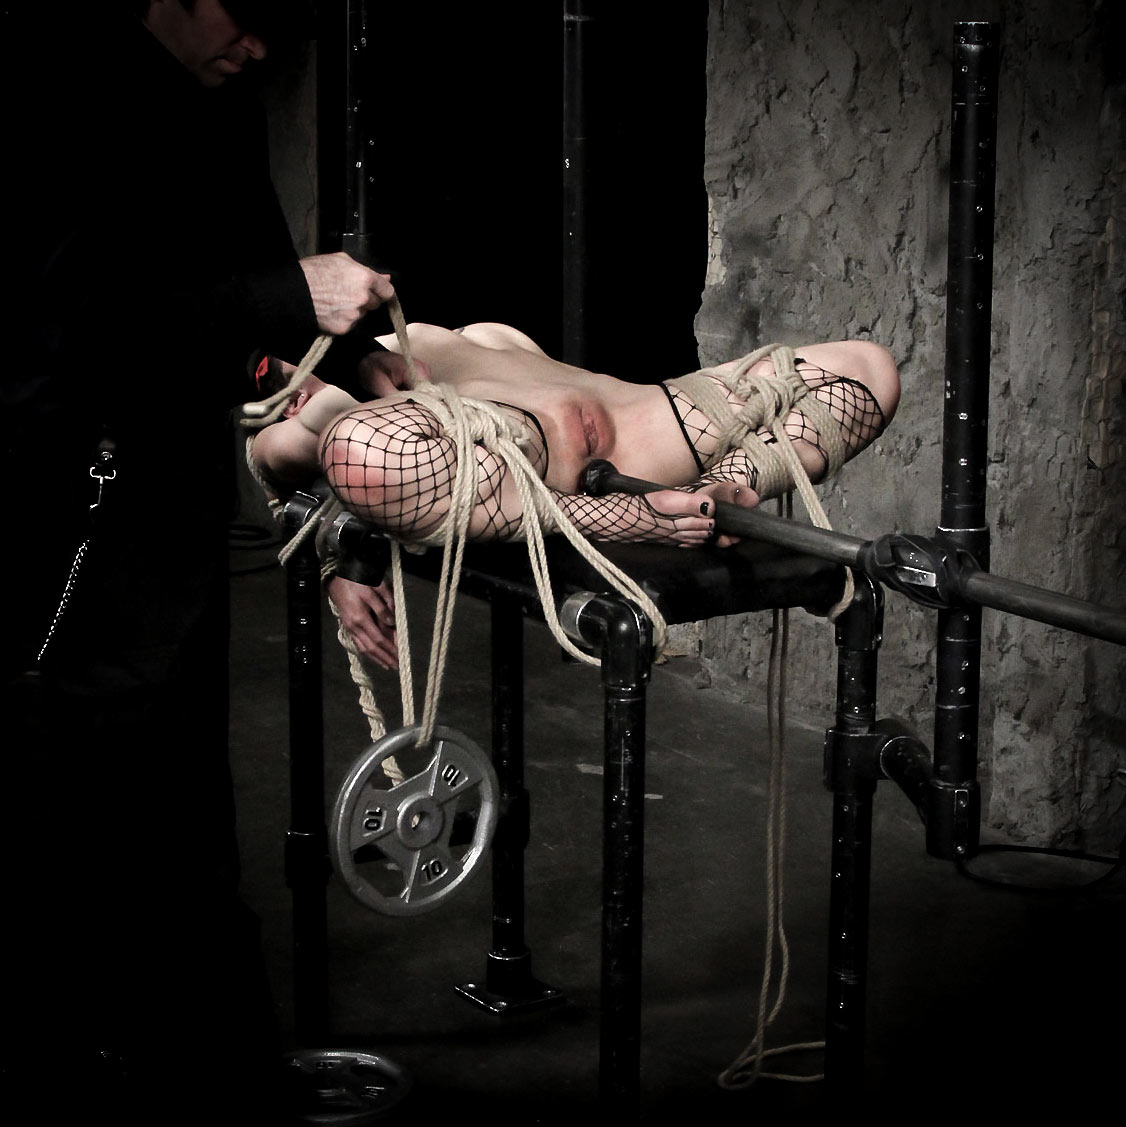 Mei Mara, nude, bound and tormented in a BDSM video at Society SM.